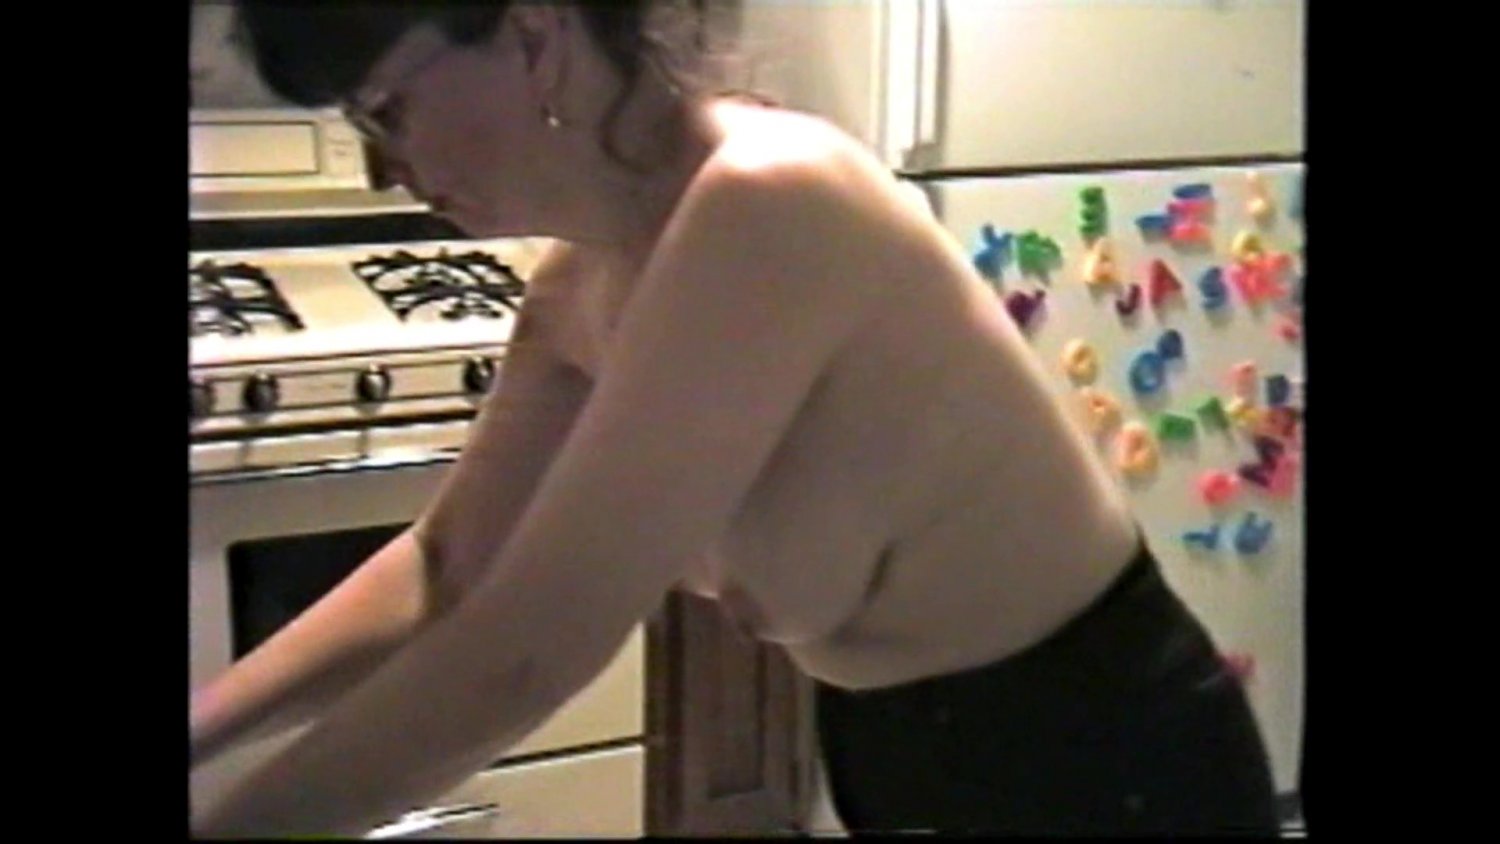 Found a video of my ex-wife doing someones dishes topless for...